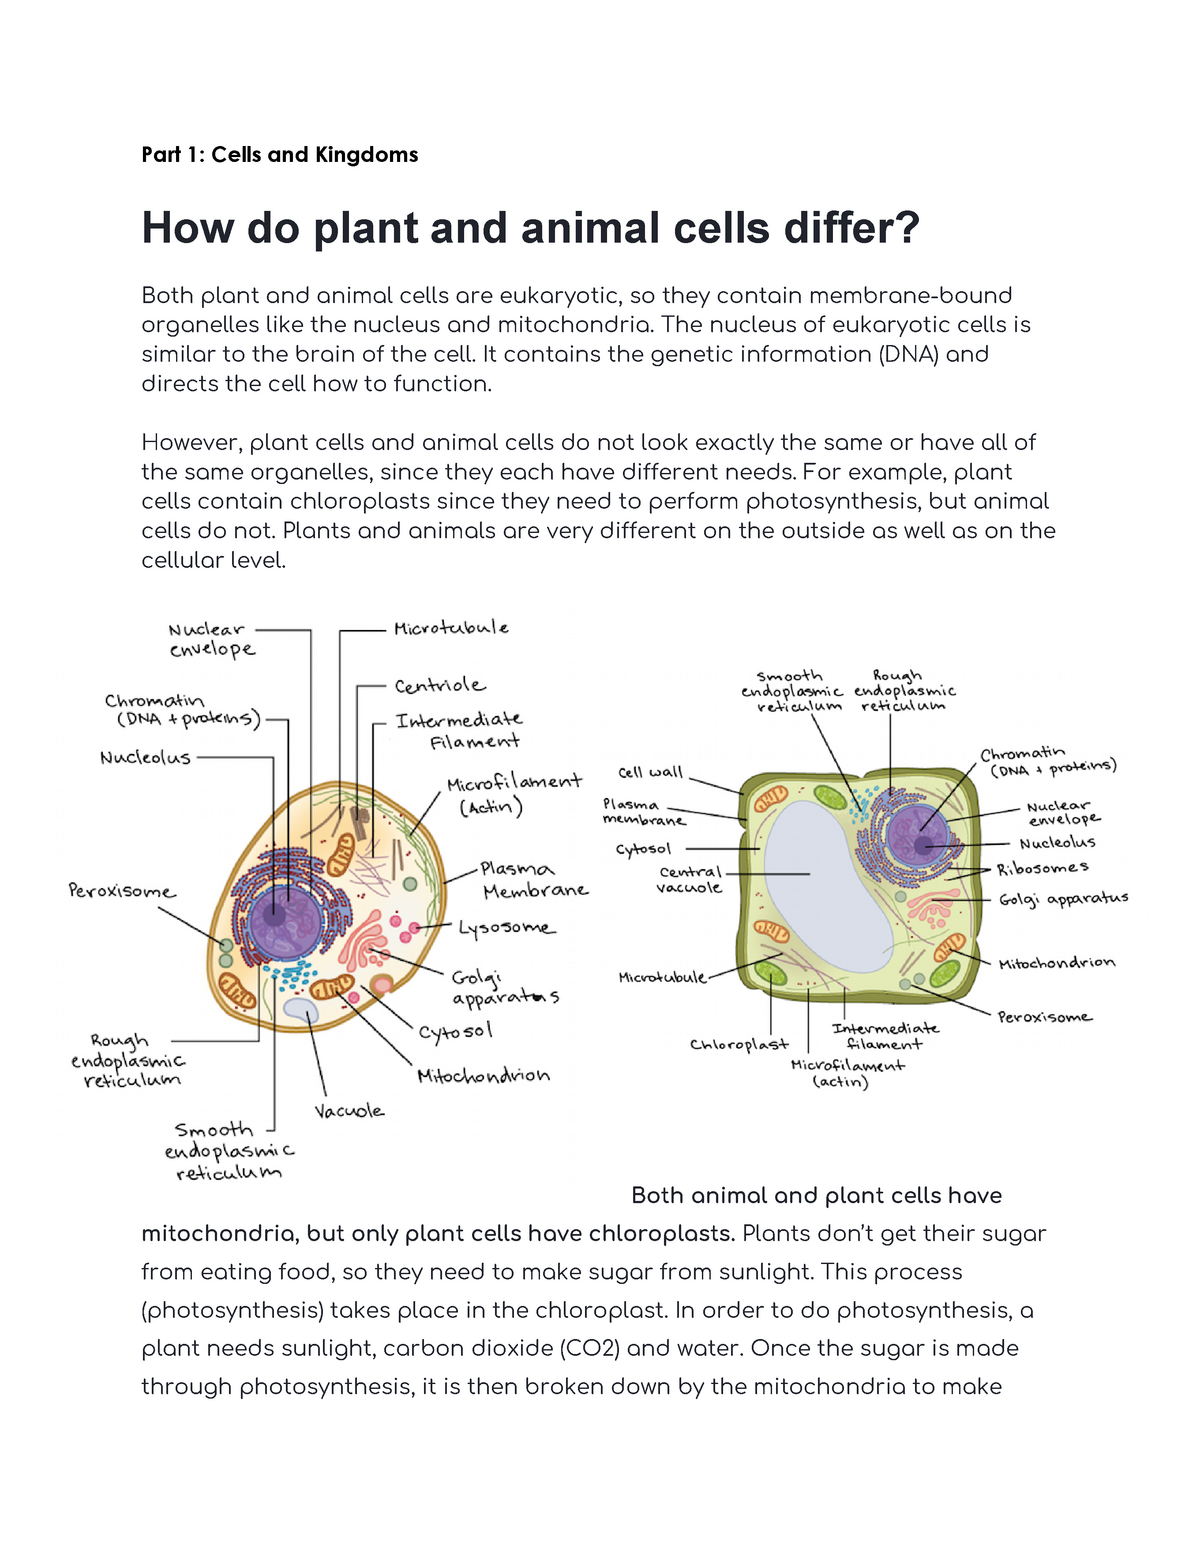 How do plant and animal cells differ? - **Part 1: Cells and Kingdoms ** How  do plant and animal - Studocu